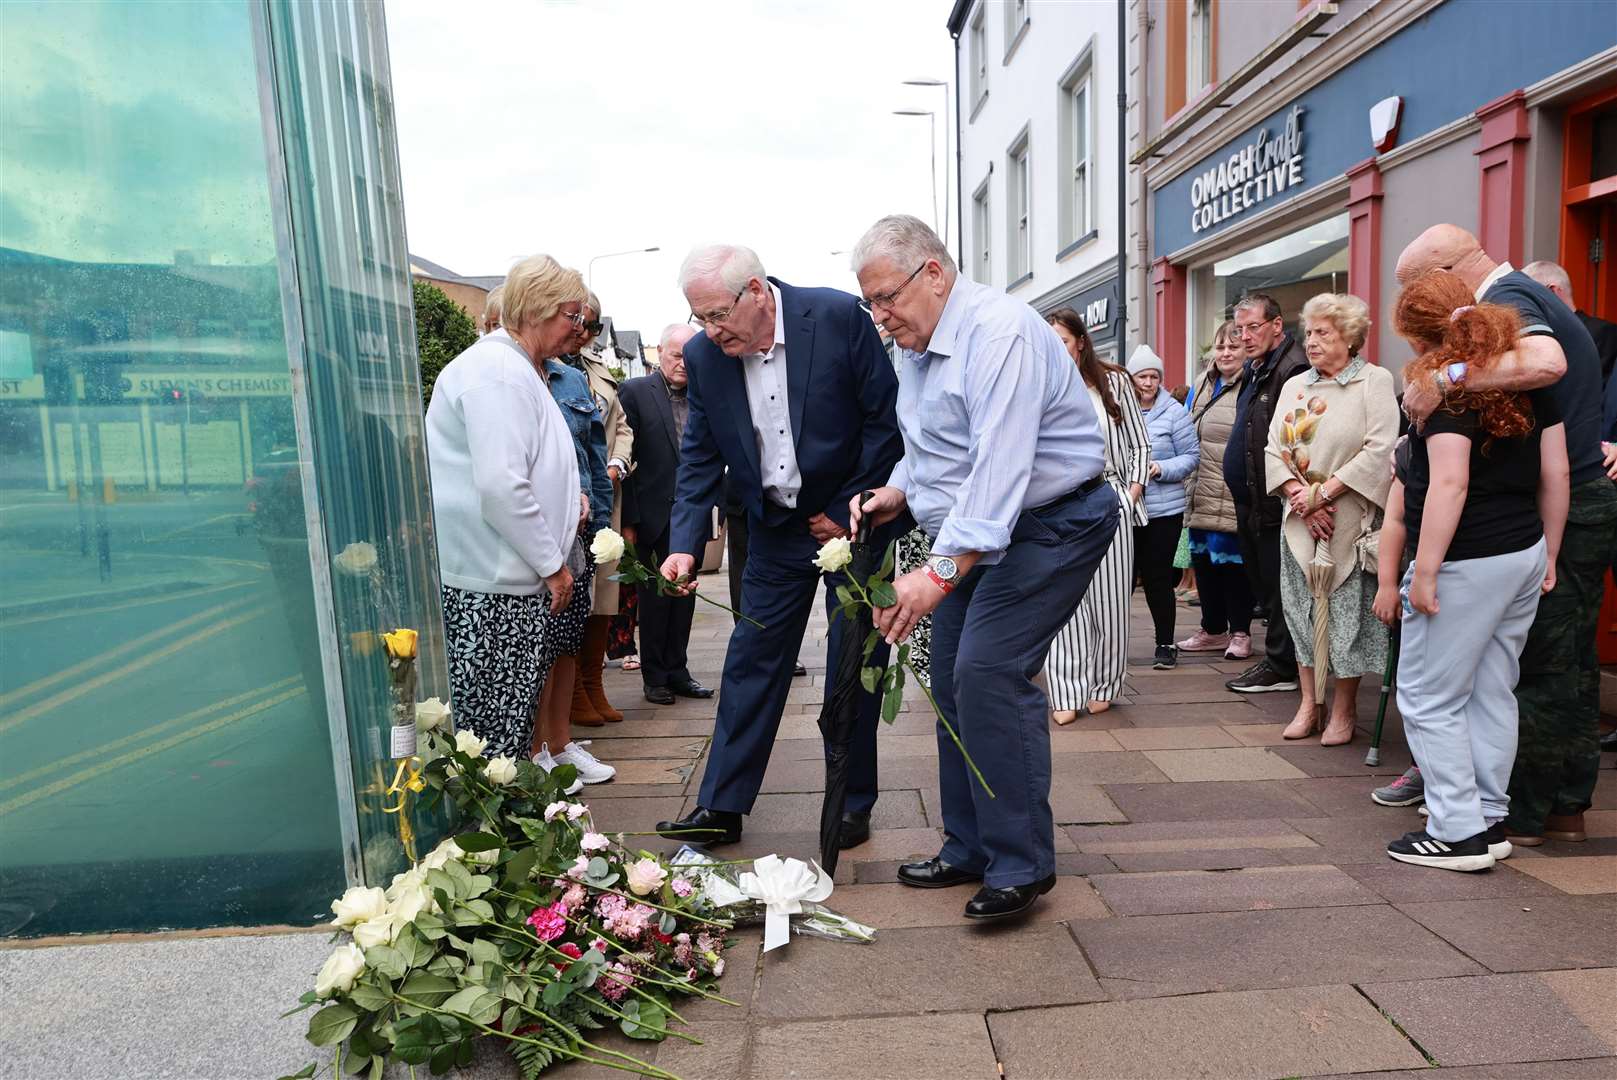 Michael Gallagher (centre), whose son Aiden died in the Omagh bombing, and Stanley McCombe whose wife Ann who was also killed, place flowers at the site of the bombing (Liam McBurney/PA)